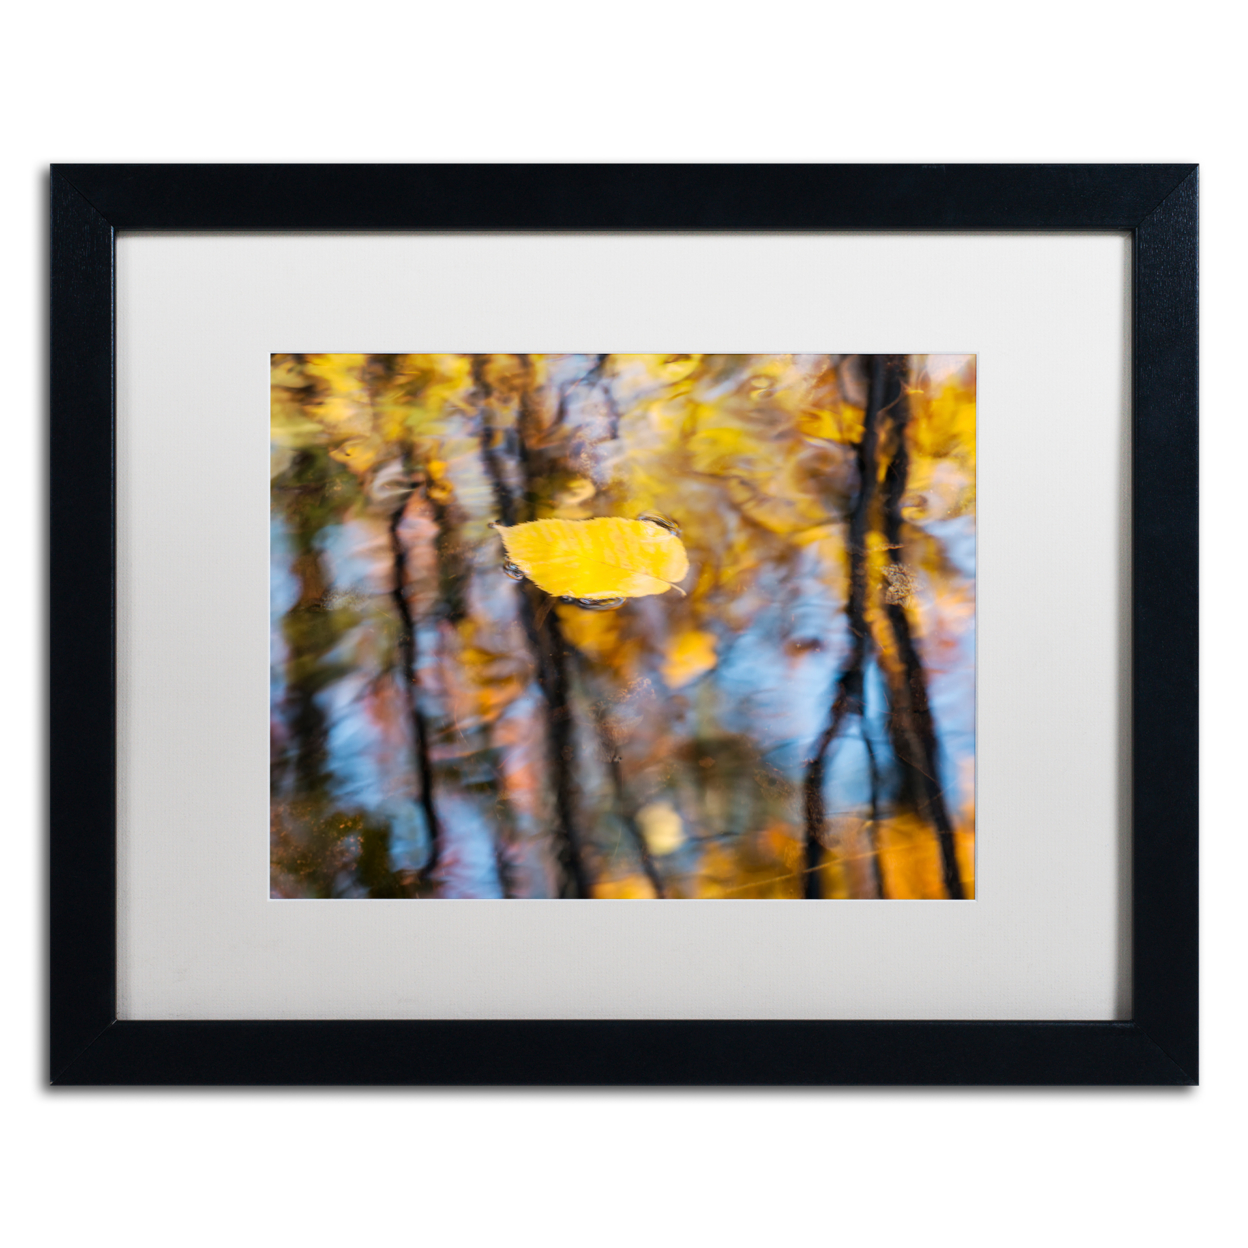 Michael Blanchette Photography 'Floater' Black Wooden Framed Art 18 X 22 Inches